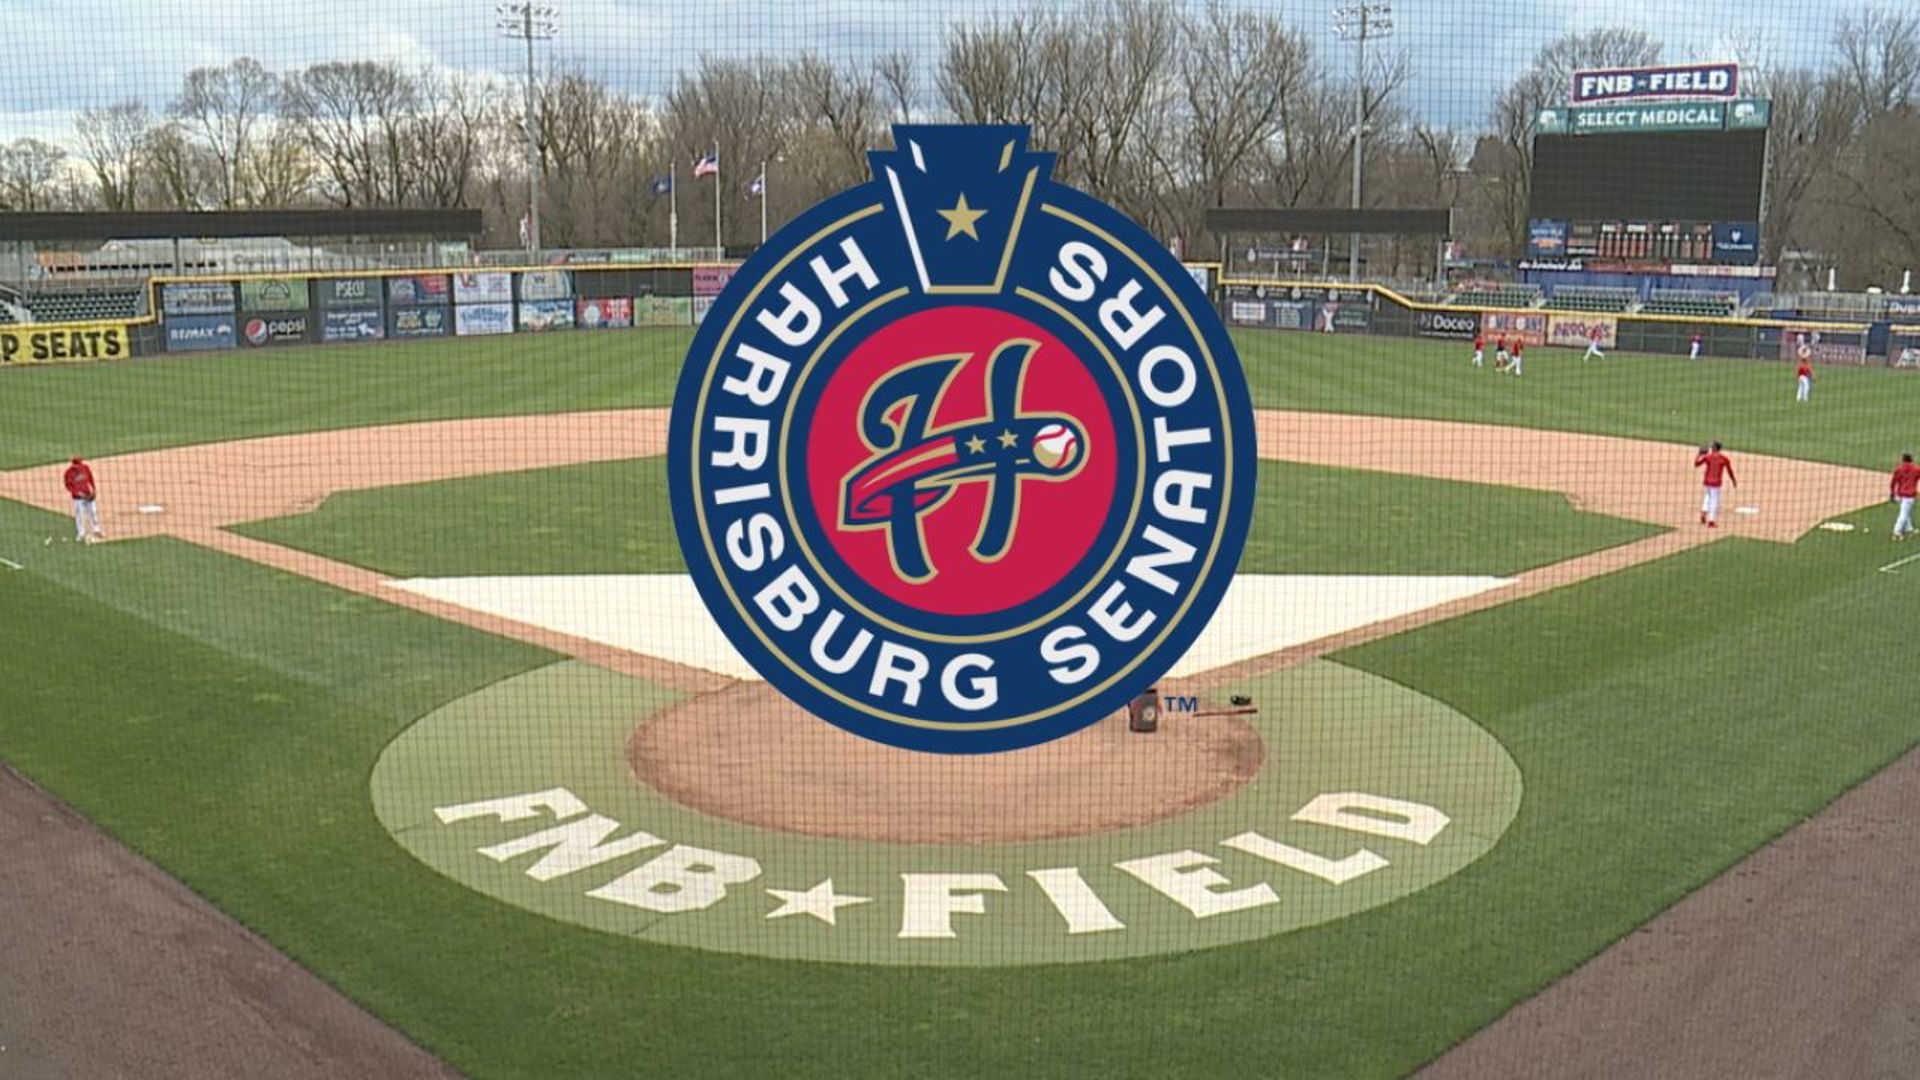 Peter Freund, the CEO of Diamond Baseball Holdings, joins the Sunday Sitdown to discuss acquiring the Harrisburg Senators.